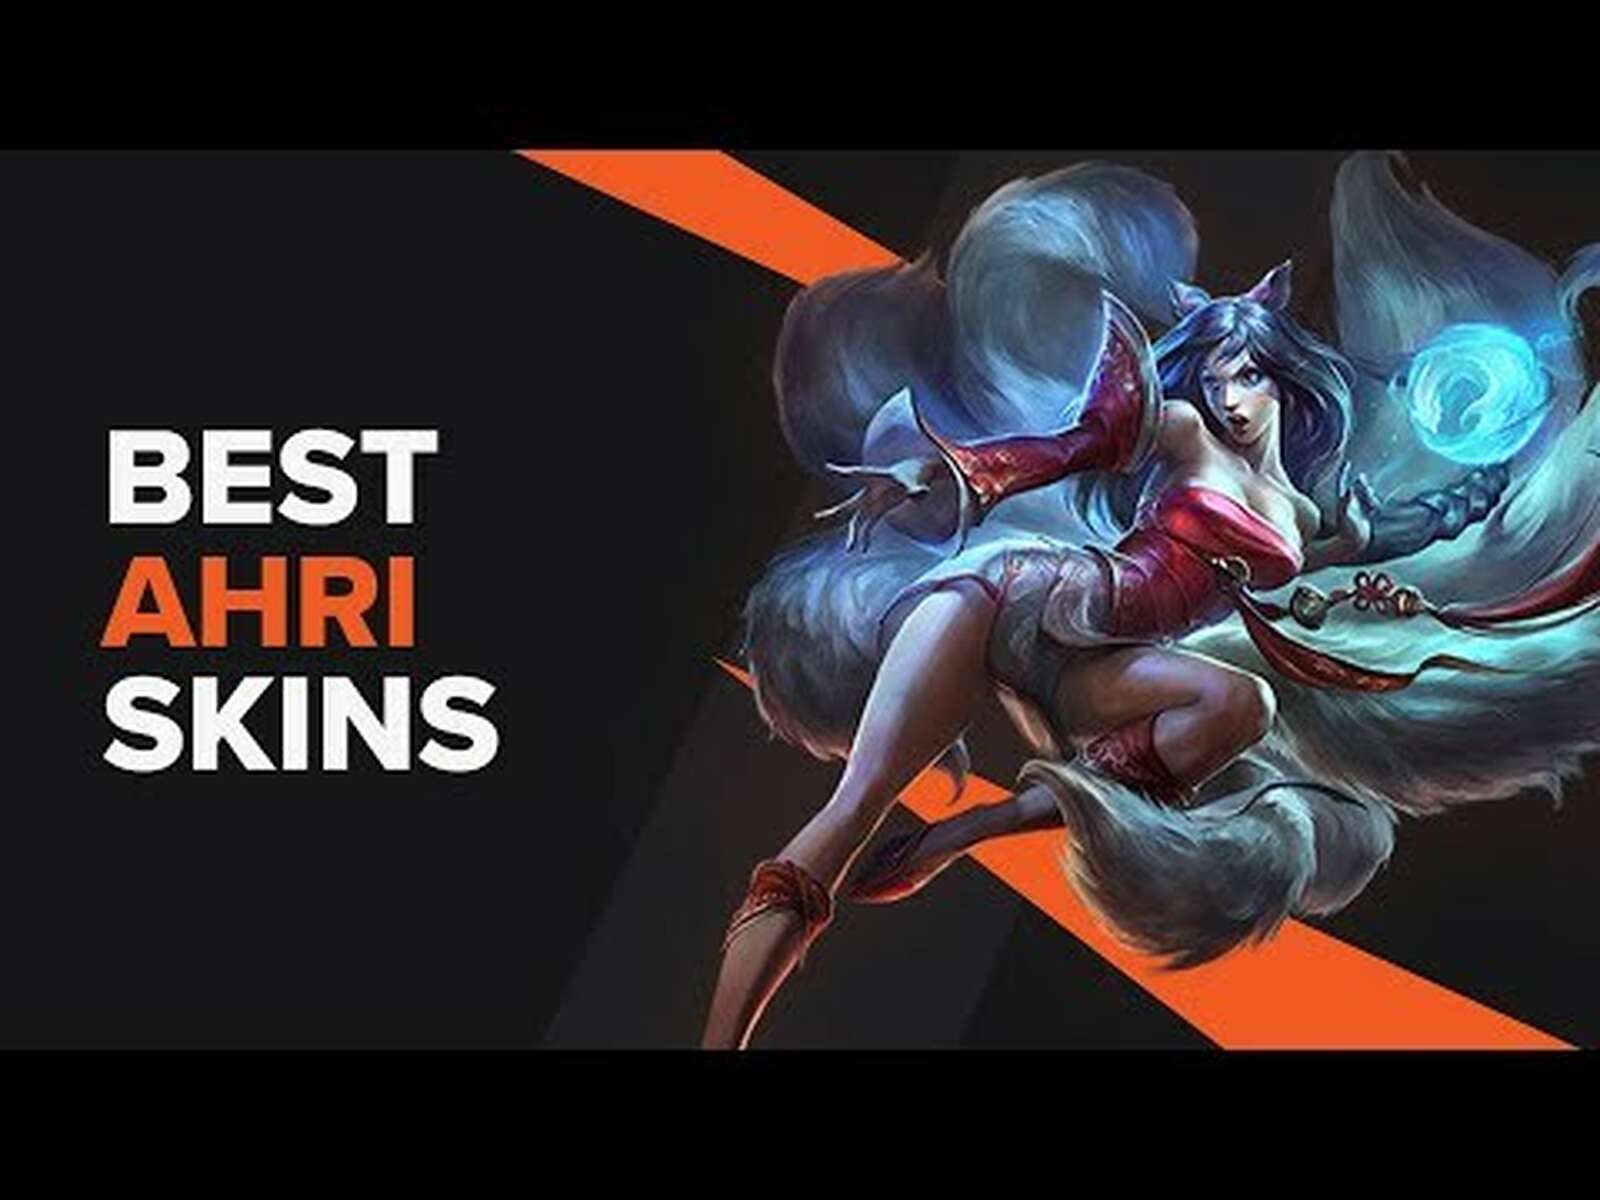 The Best Ahri Skins in League of Legends